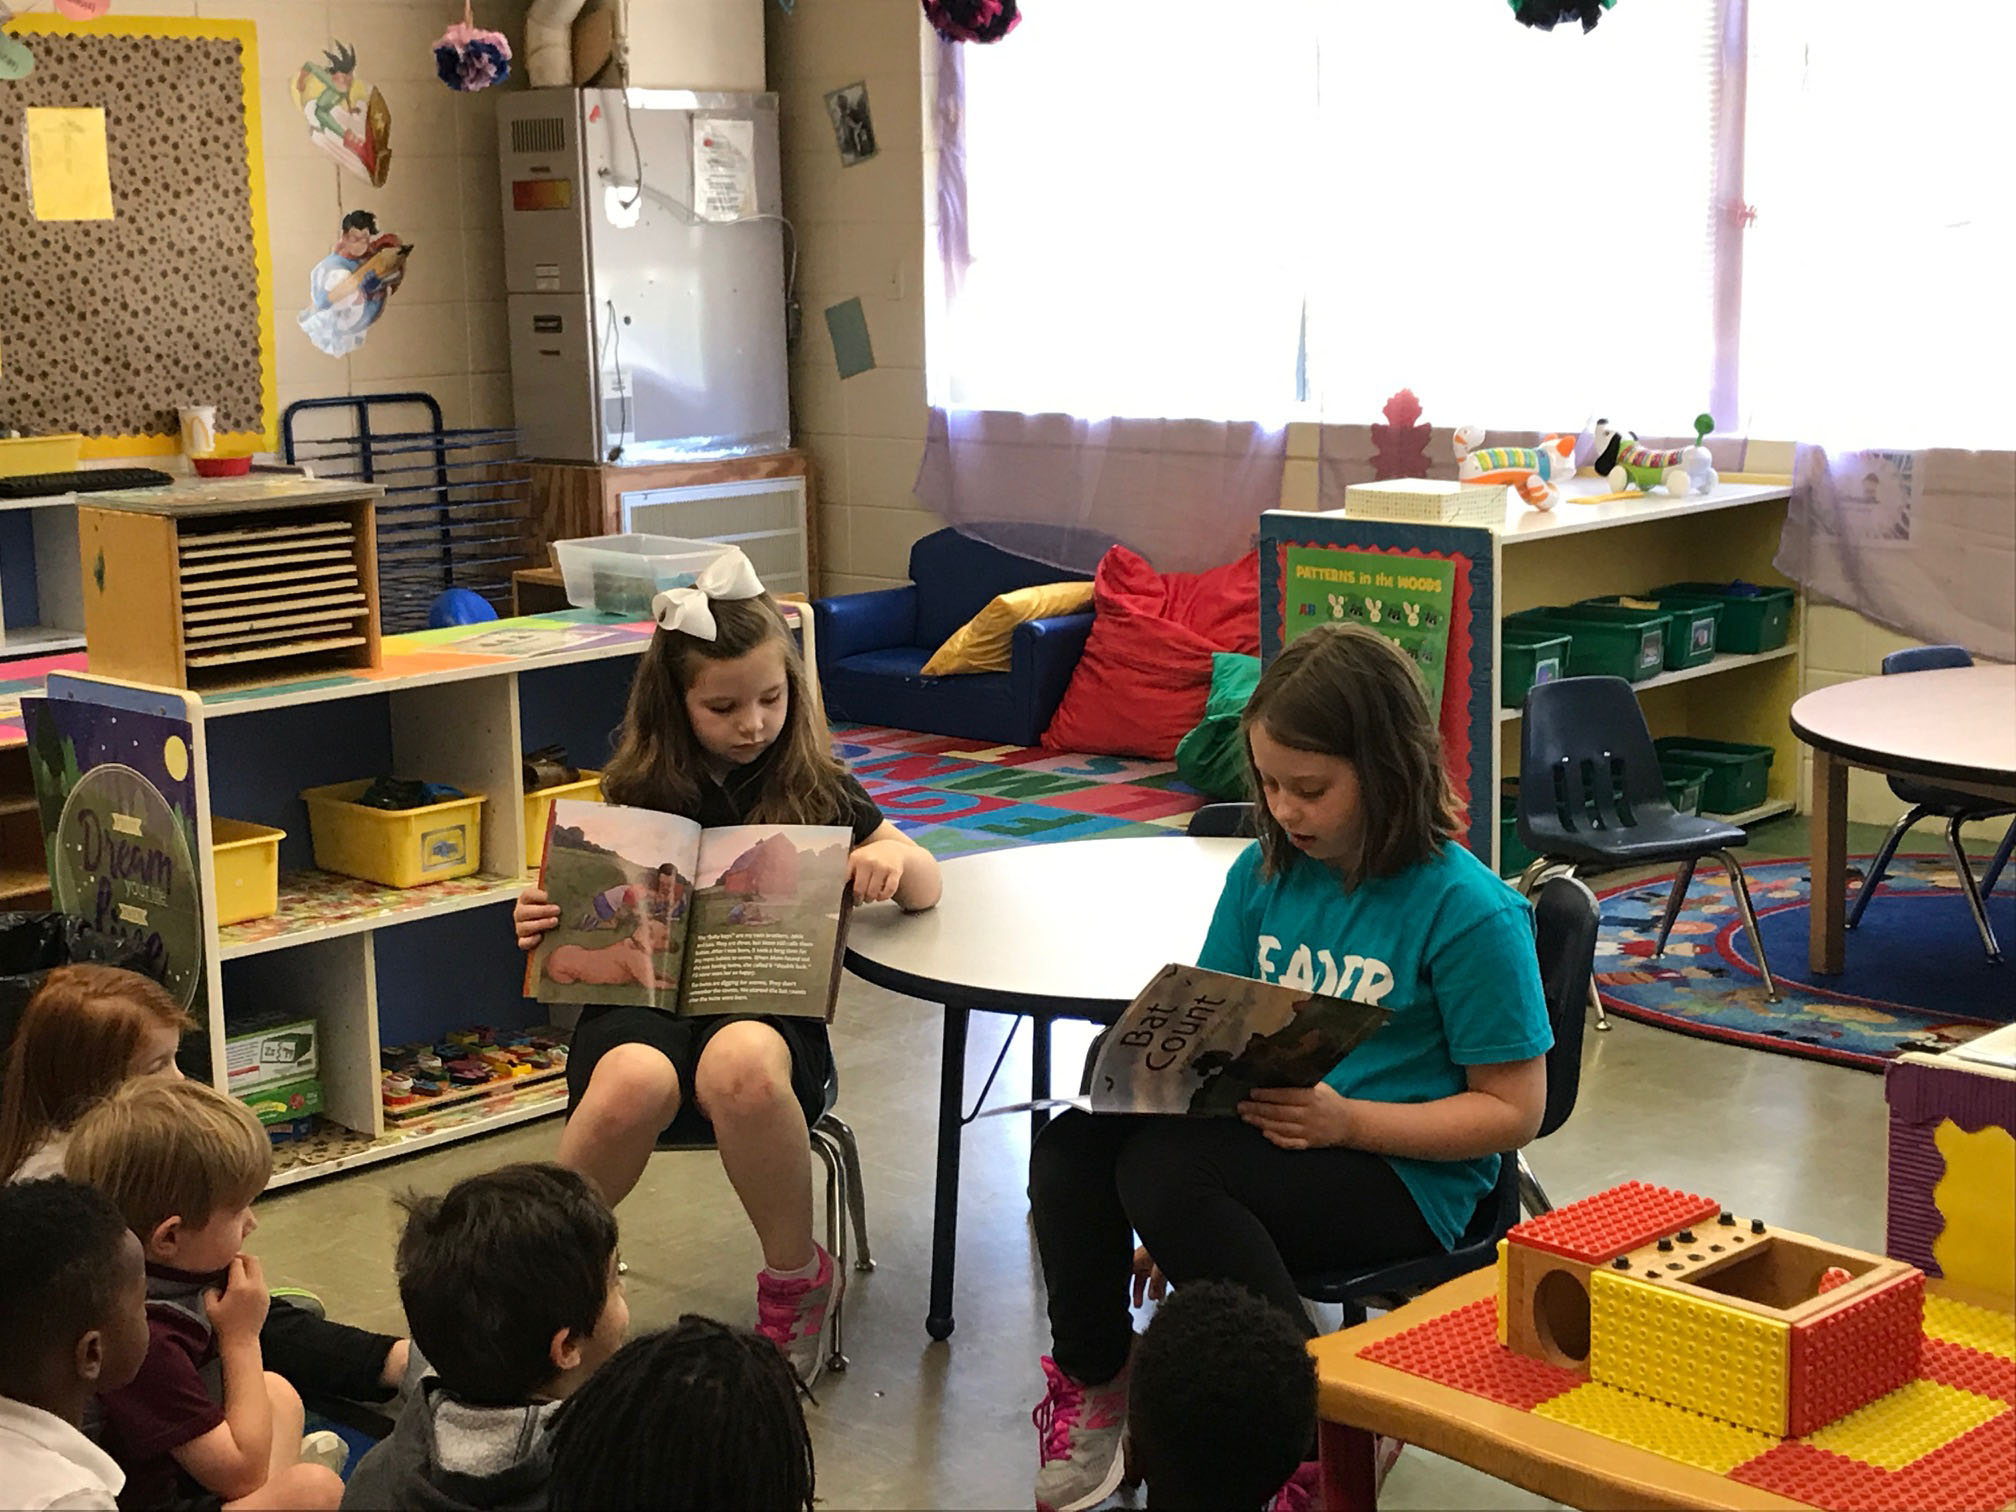 Margot Hoffman reads the Giverny book to a class, while Mary Mack Walker shows the book's illustrations to the students.